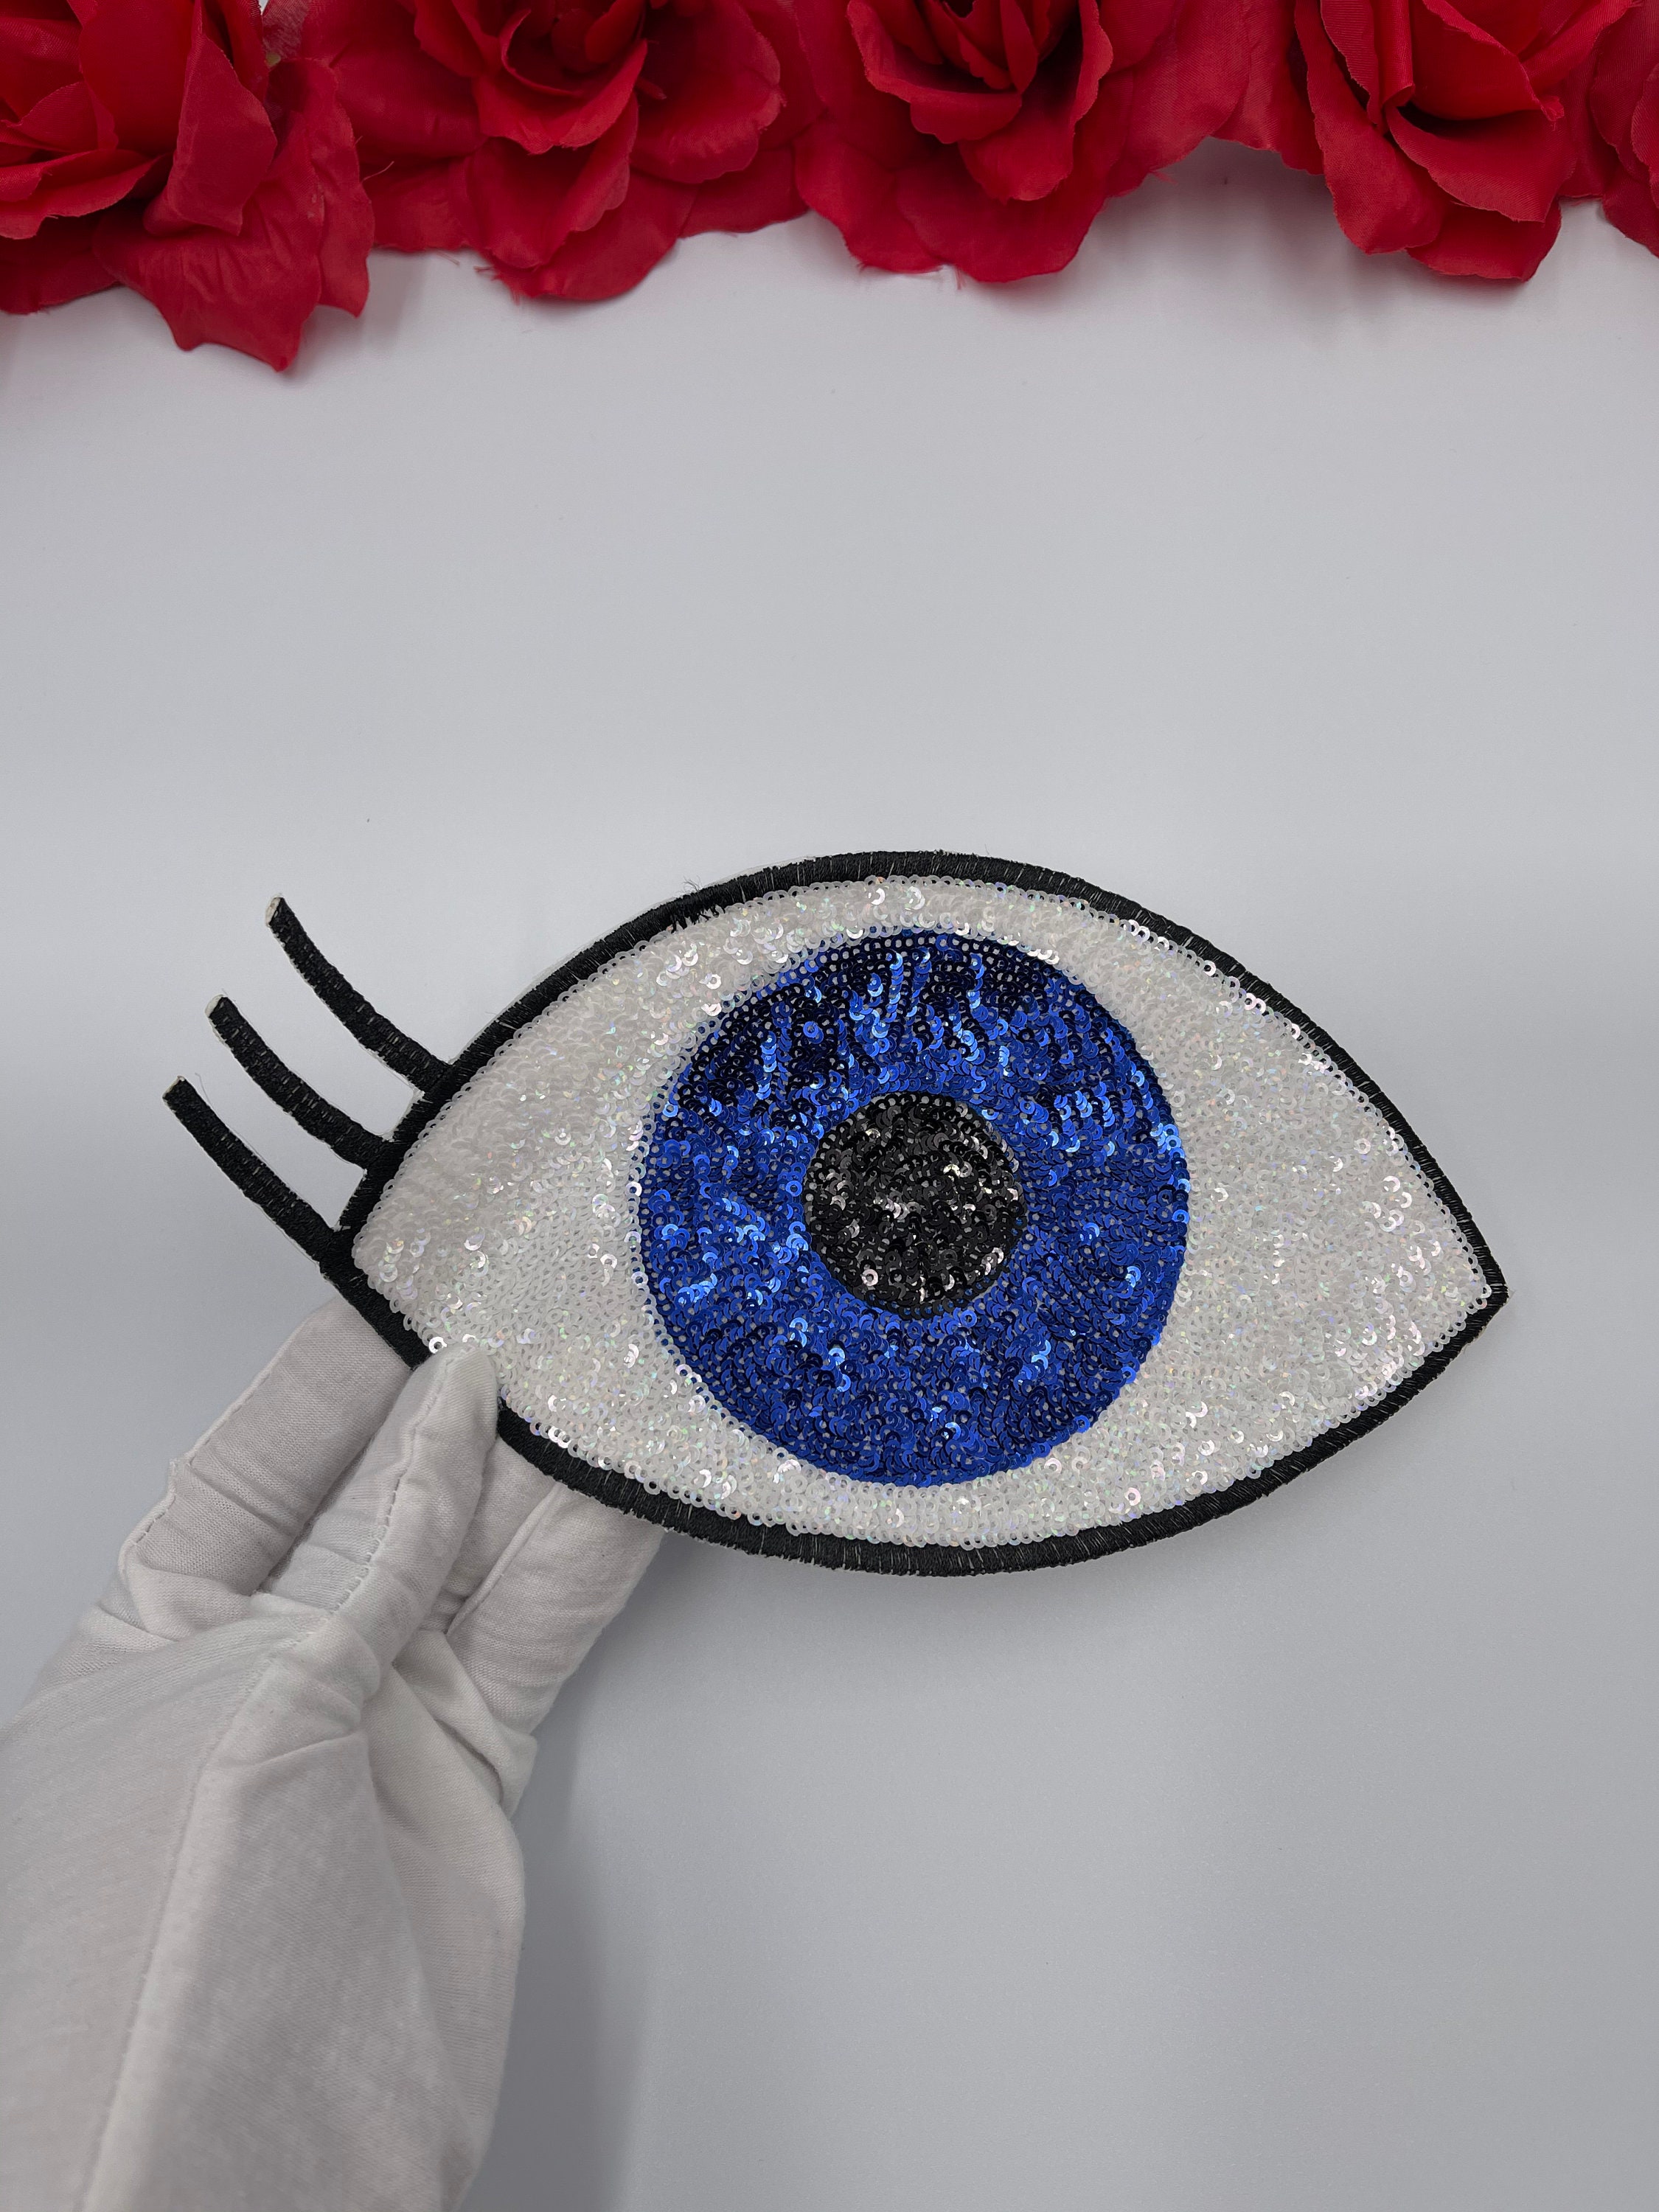 9 1/4” Evil Eye Patch, Sequin Iron On Patch - Reanna's Closet 2